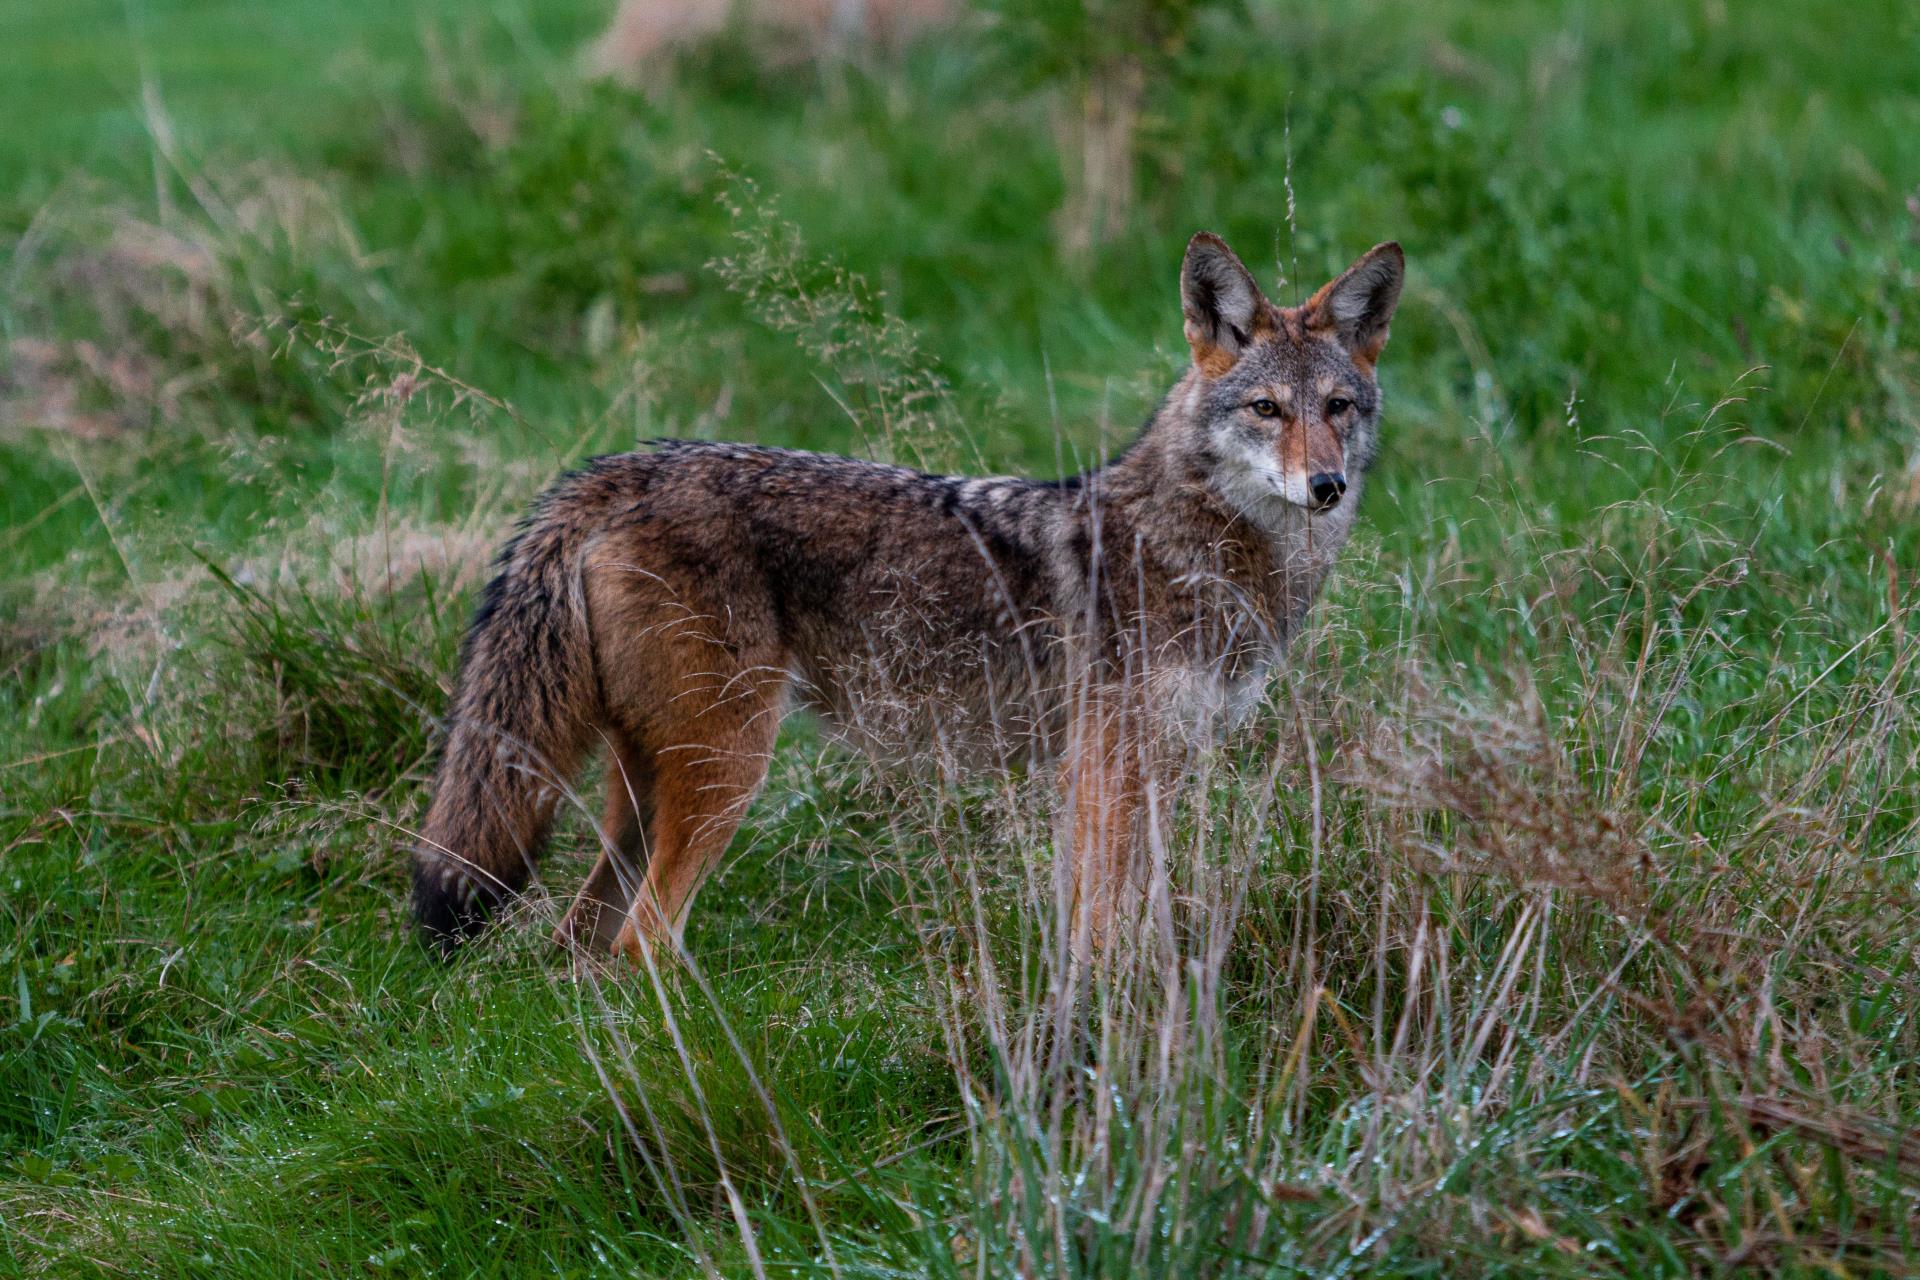 Coyotes & Living With Wildlife Community Meeting on April 28